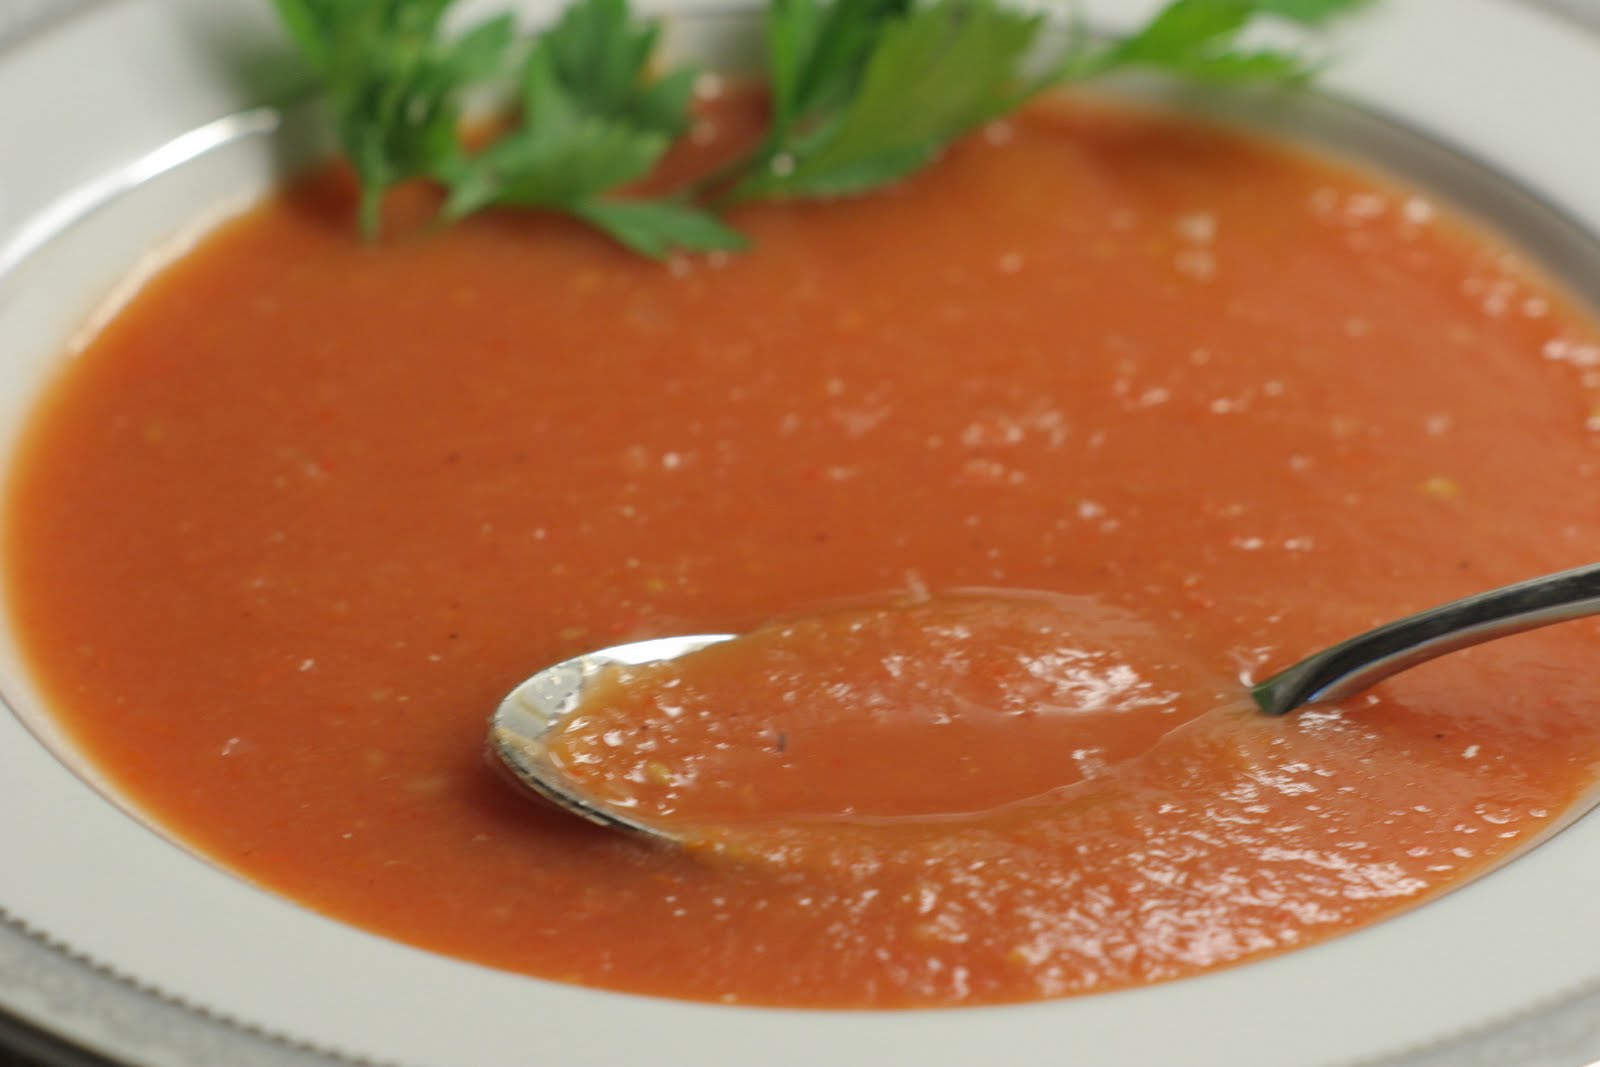 Four seasons of food: Roasted tomato soup with smoked paprika